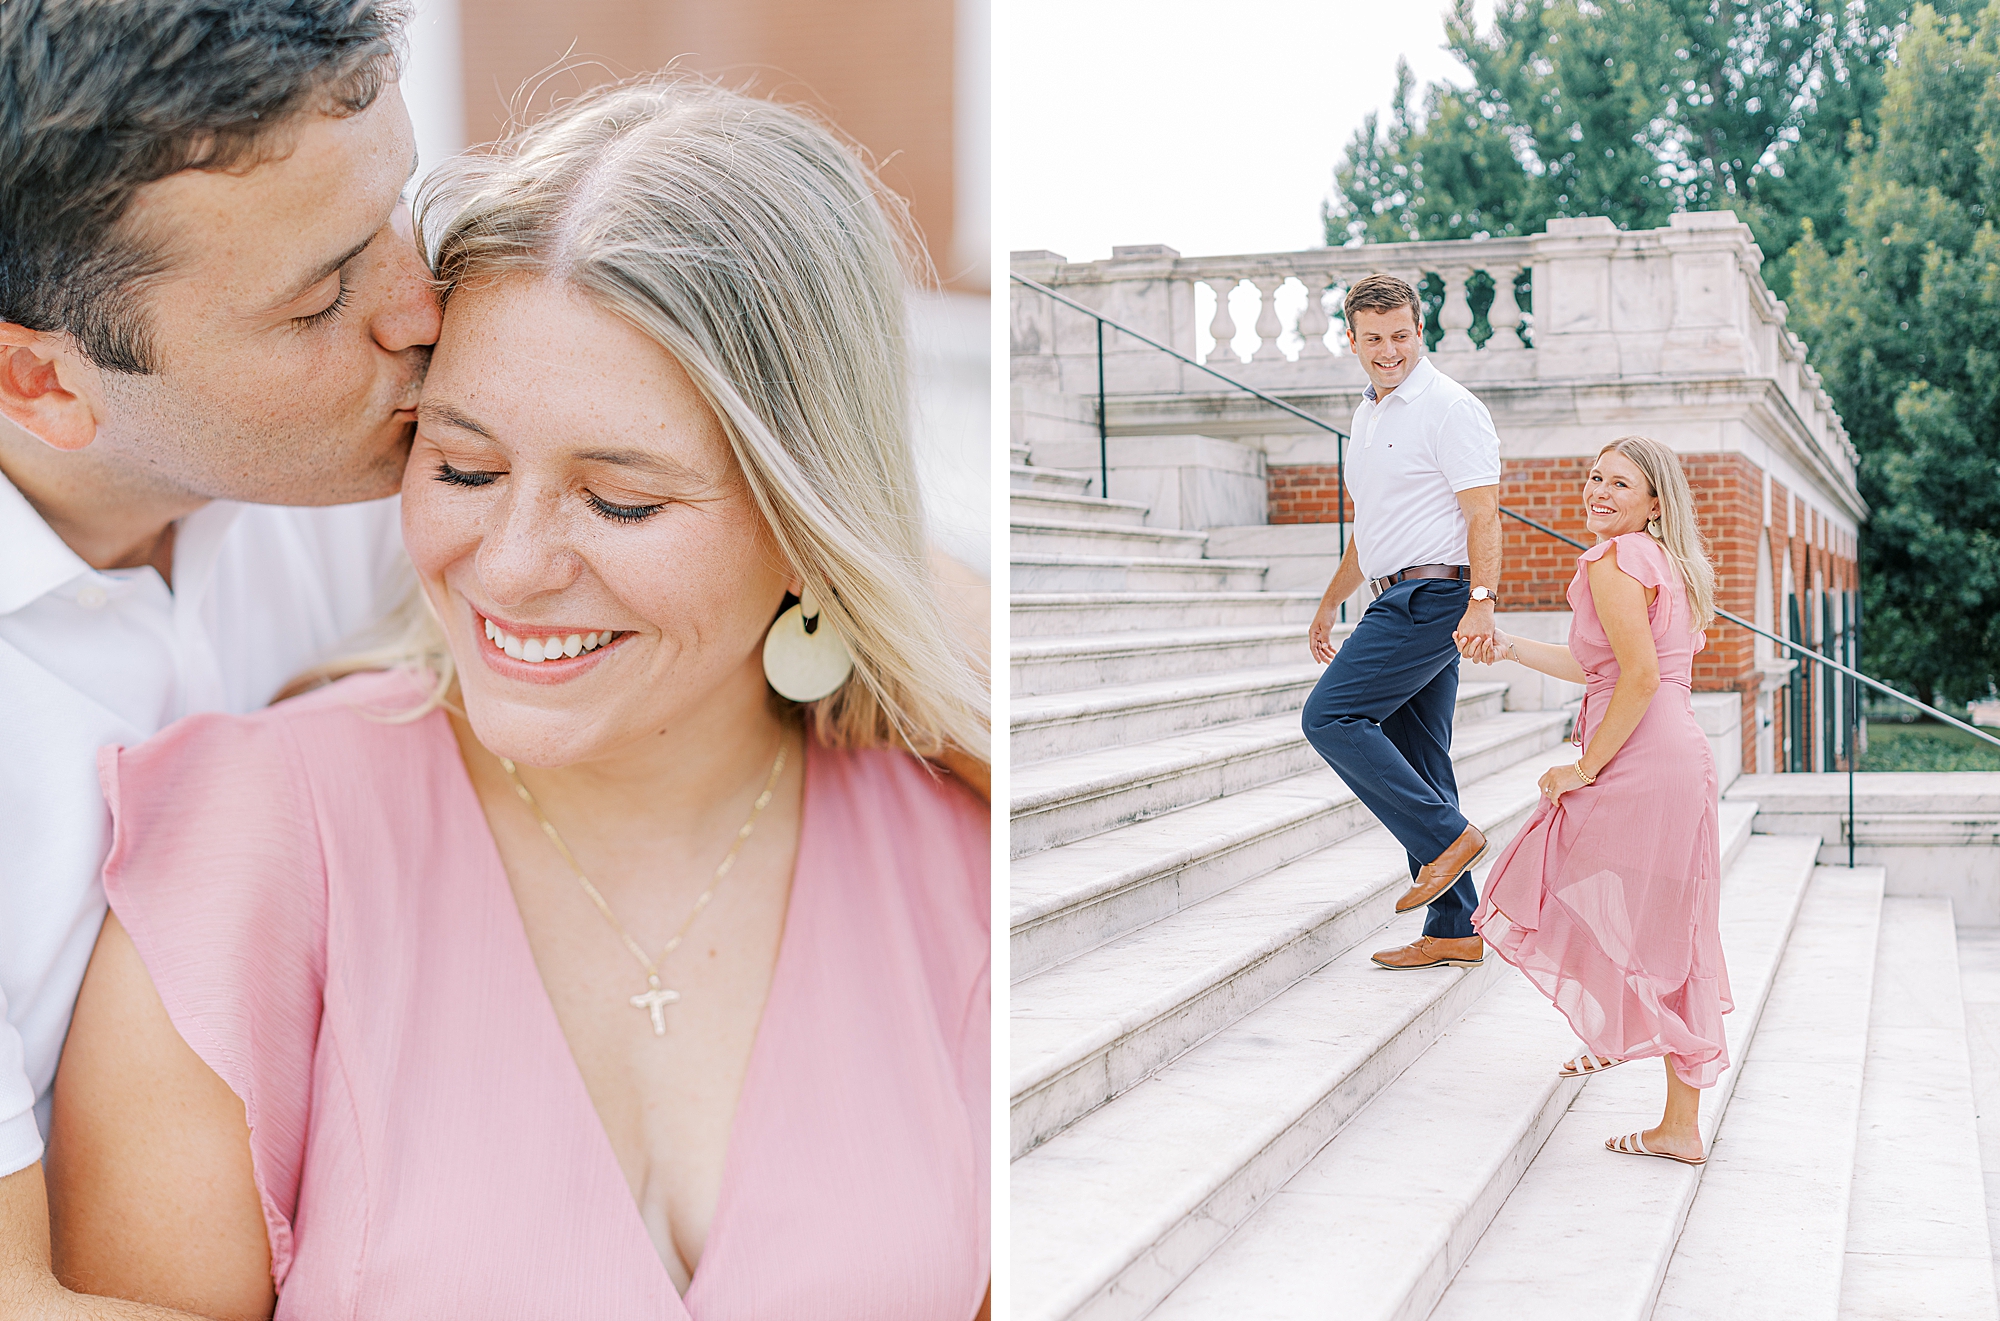 Portraits of couple at University of Virginia during summer time engagement session. Woman wearing light pink dress from Altar'd state.